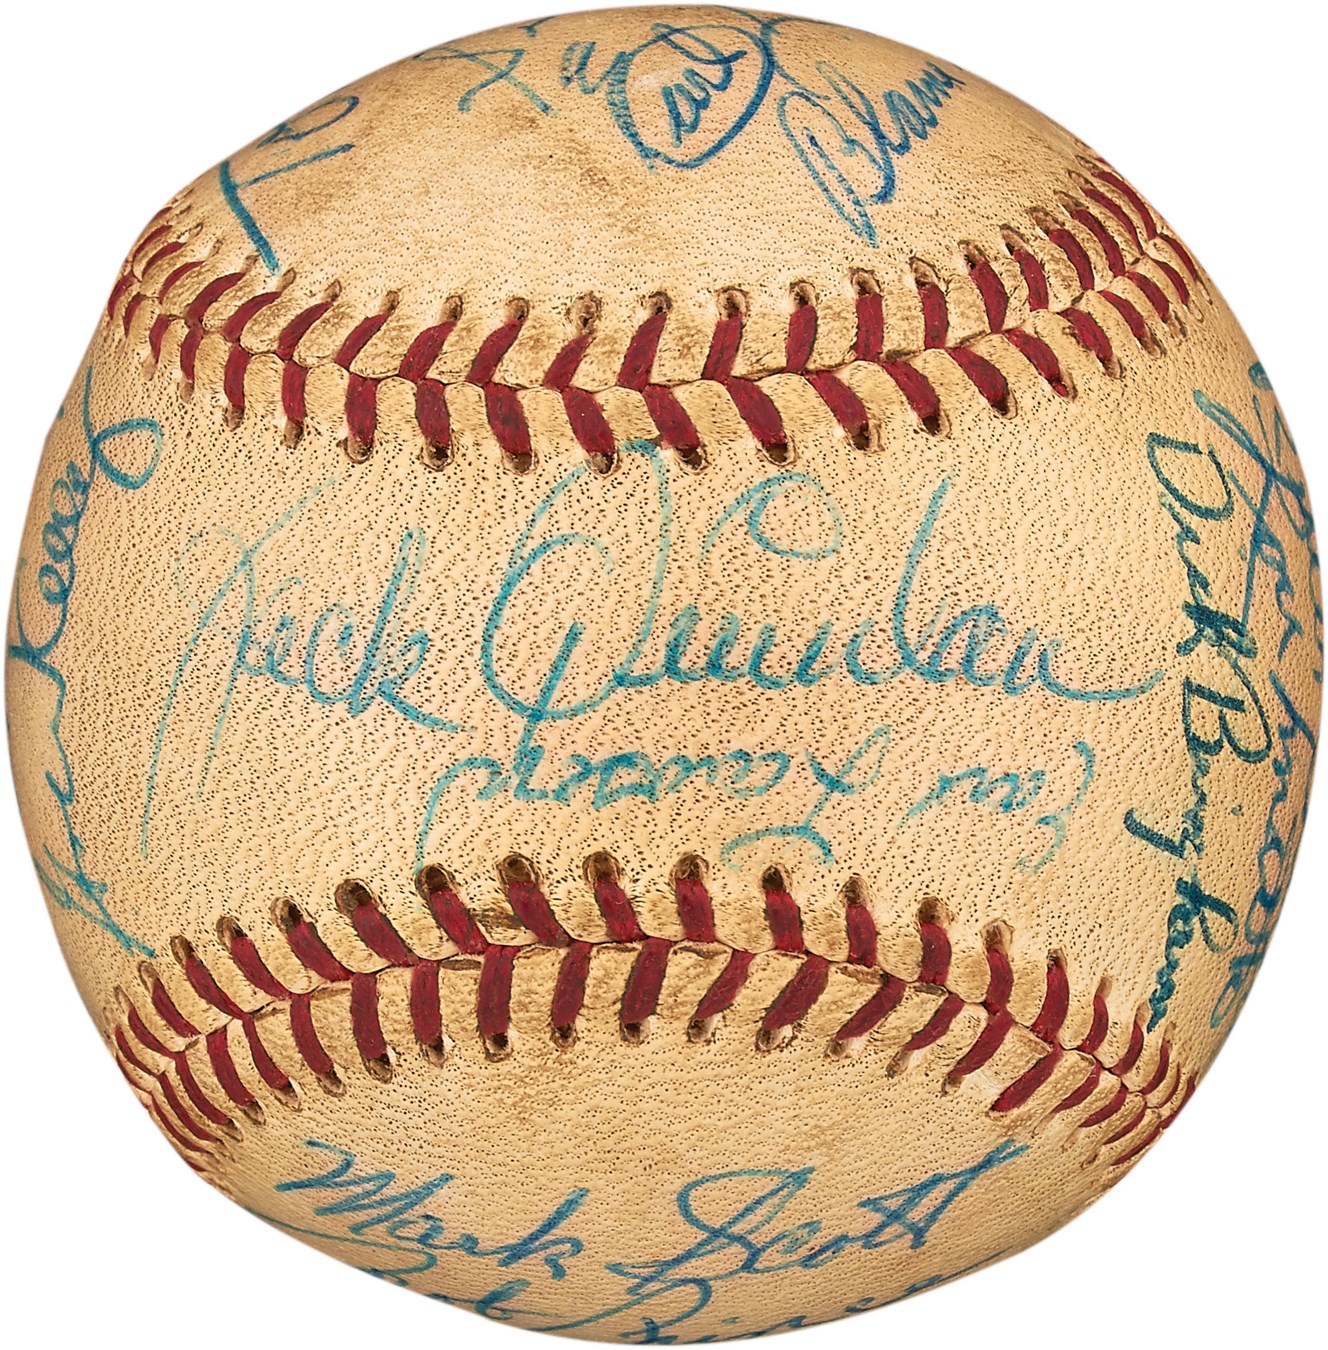 - 1950s Sportscasters and Sportswriters Signed Baseball